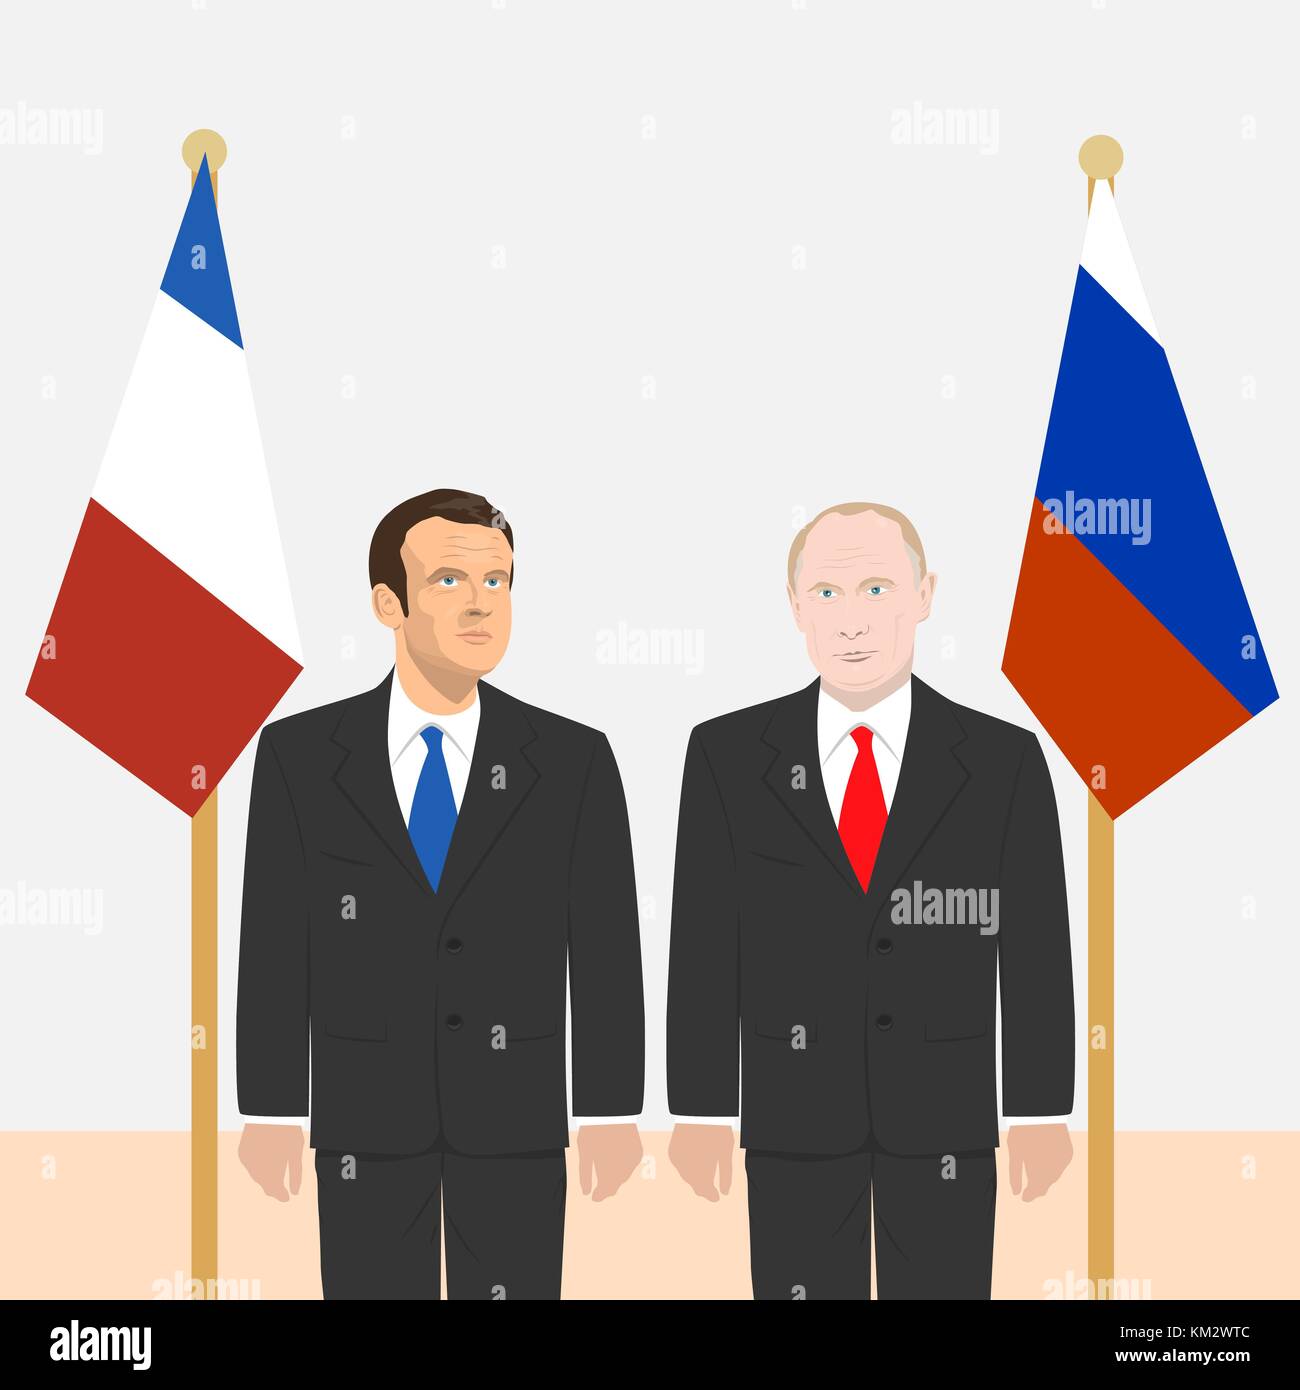 03.12.2017 Editorial illustration of the President of France Emmanuel Macron and the Russian Federation President Vladimir Putin on flags background. Stock Vector